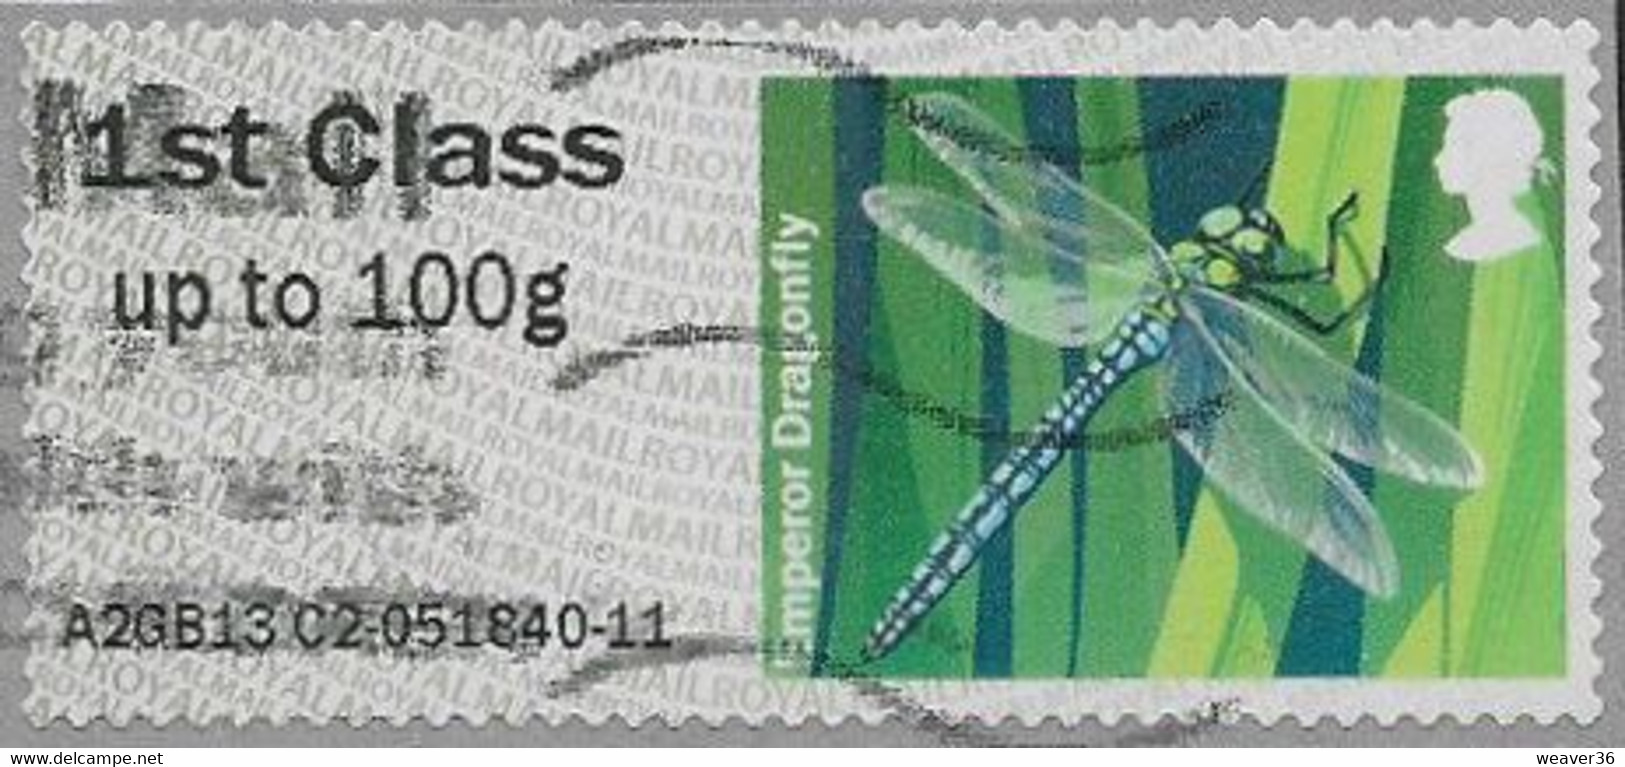 GB 2013 Freshwater Life (1st Series) 1st Type 5 Issuing Office A2GB13 Used [21/25714/ND] - Post & Go (automatenmarken)